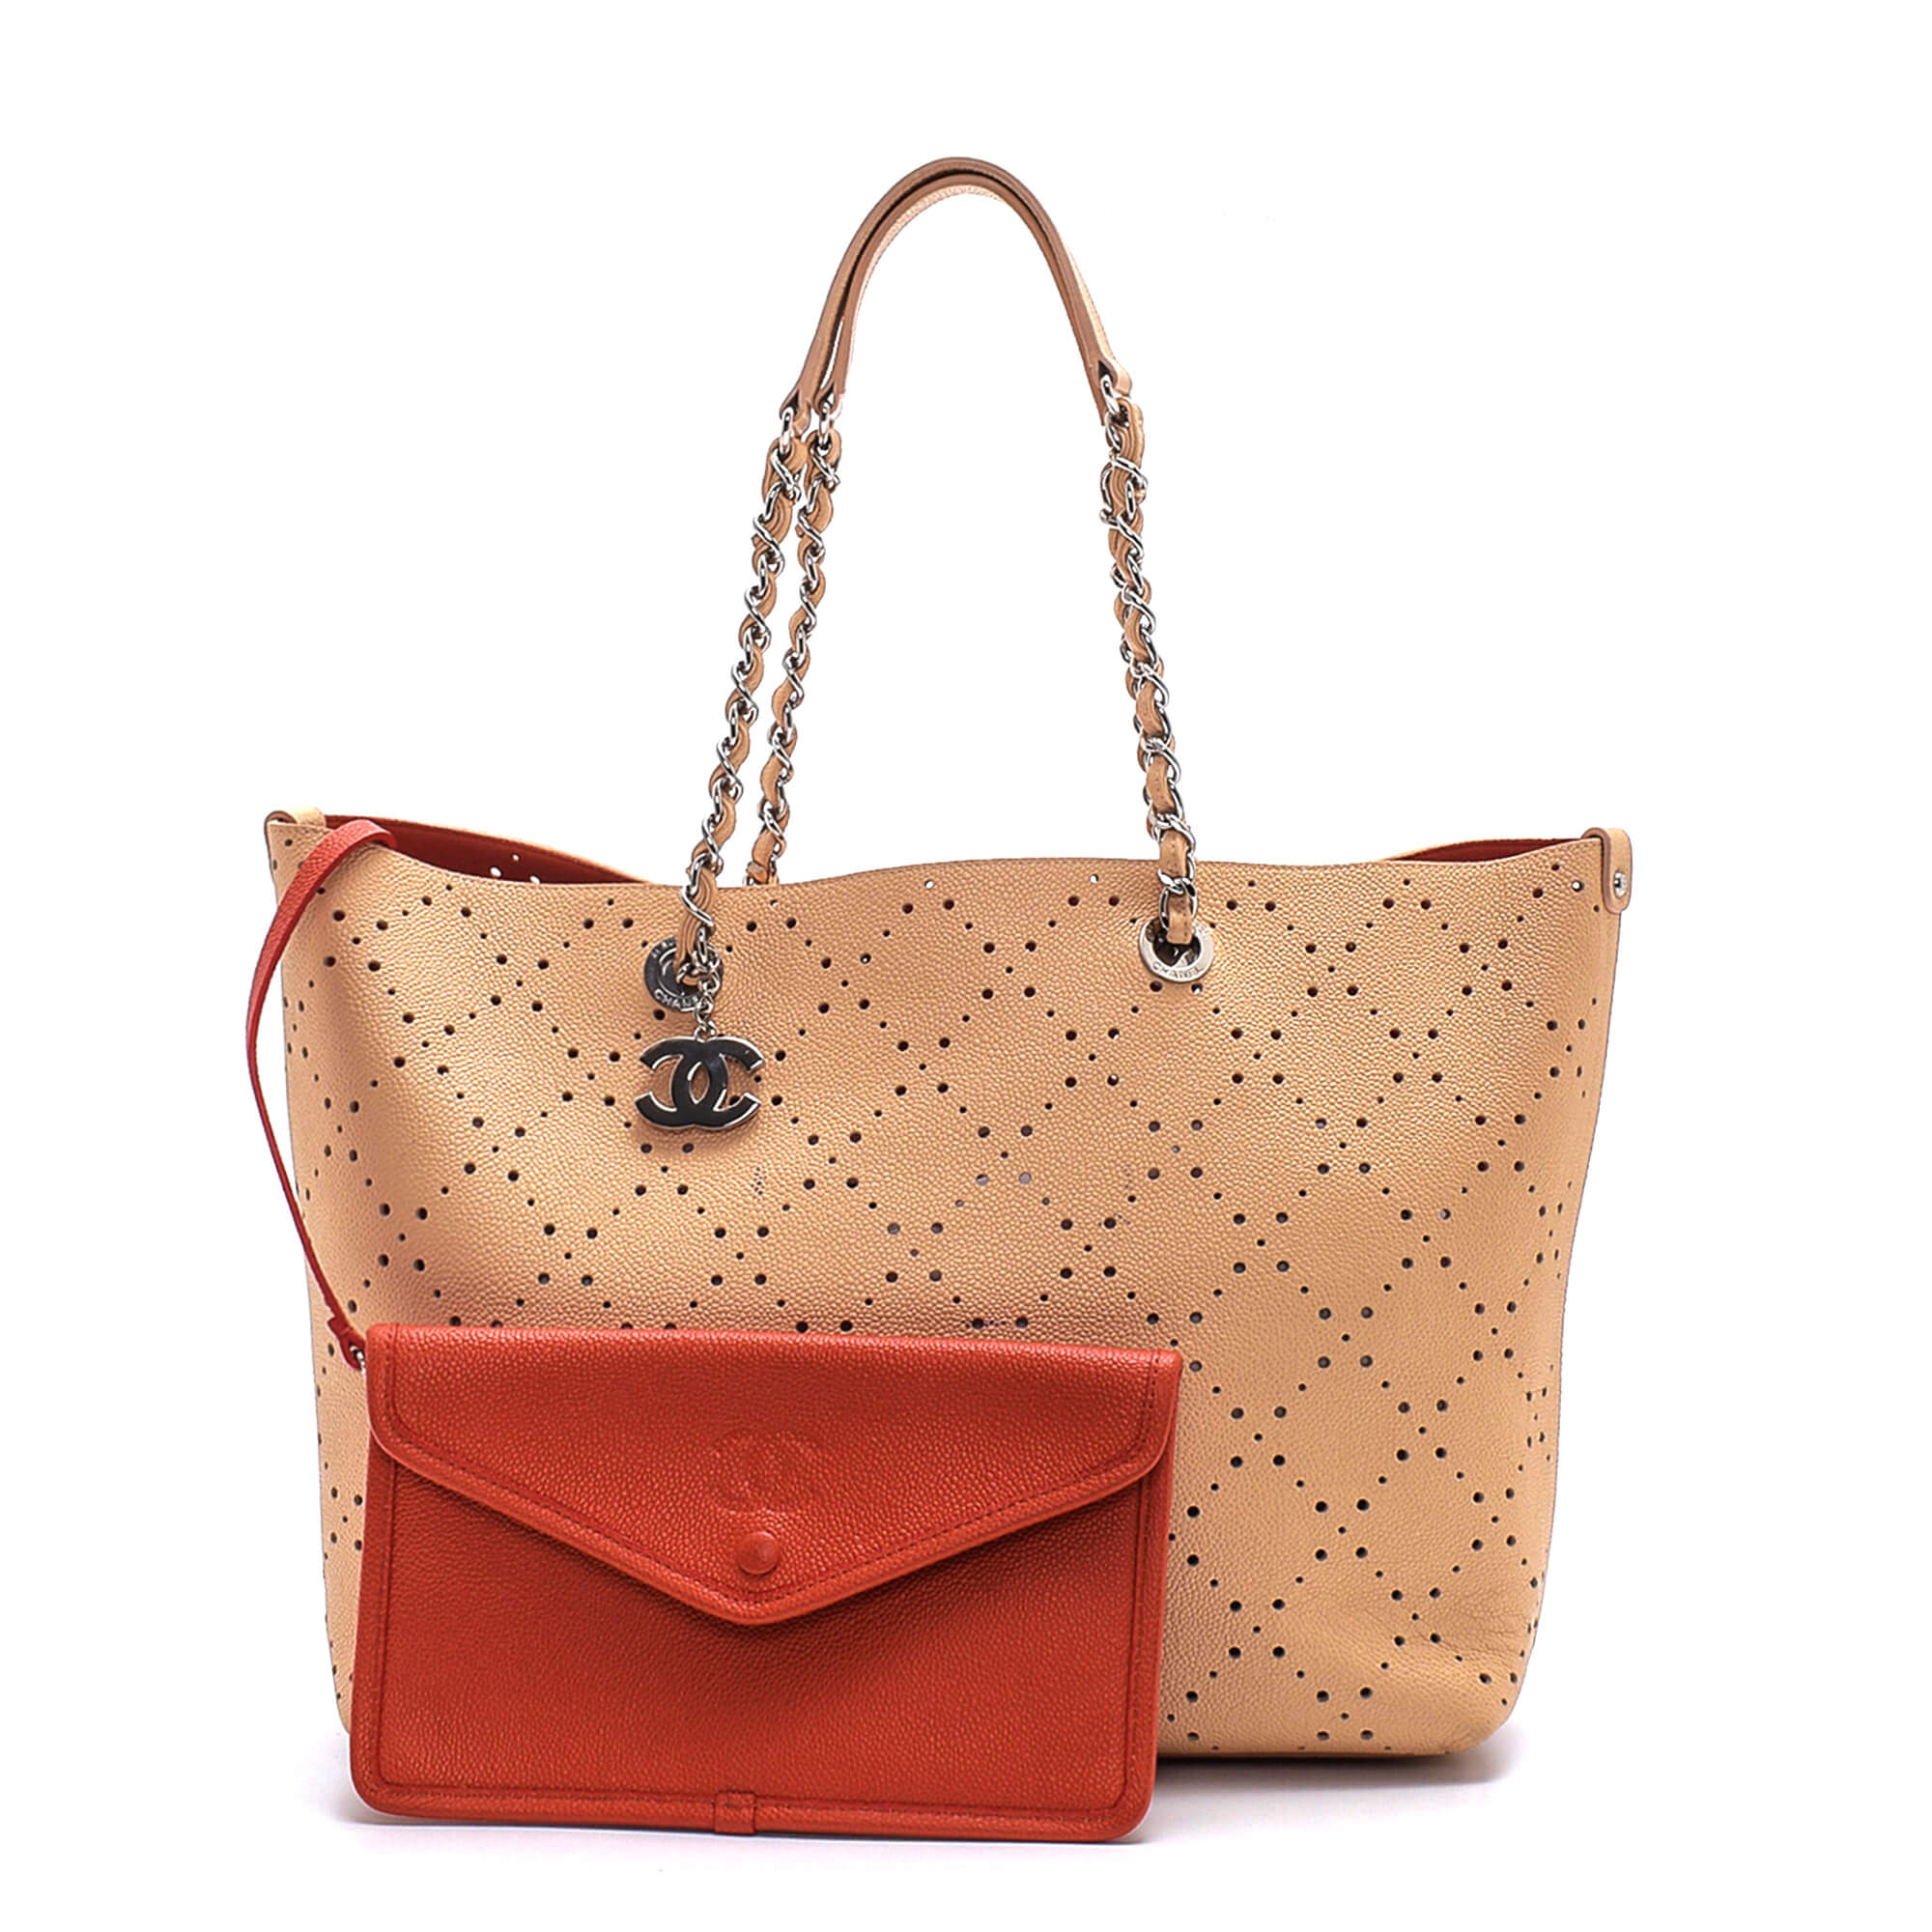 Chanel - Salmon and Orange Grained Leather Perforated Large Shopping Bag